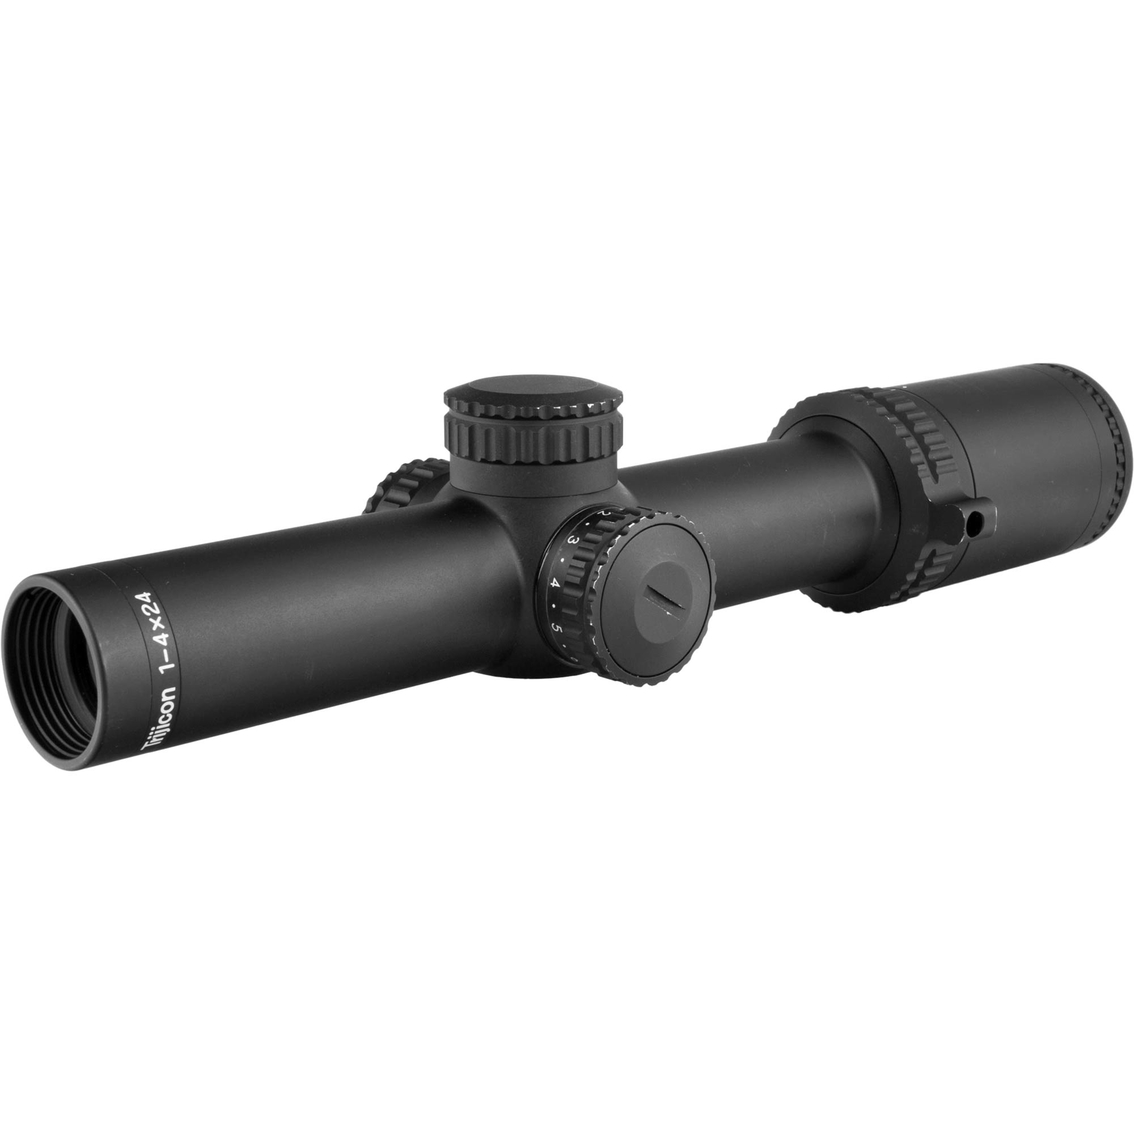 Trijicon AccuPower 1-4x24 SG-C/D Red Riflescope - Image 3 of 4